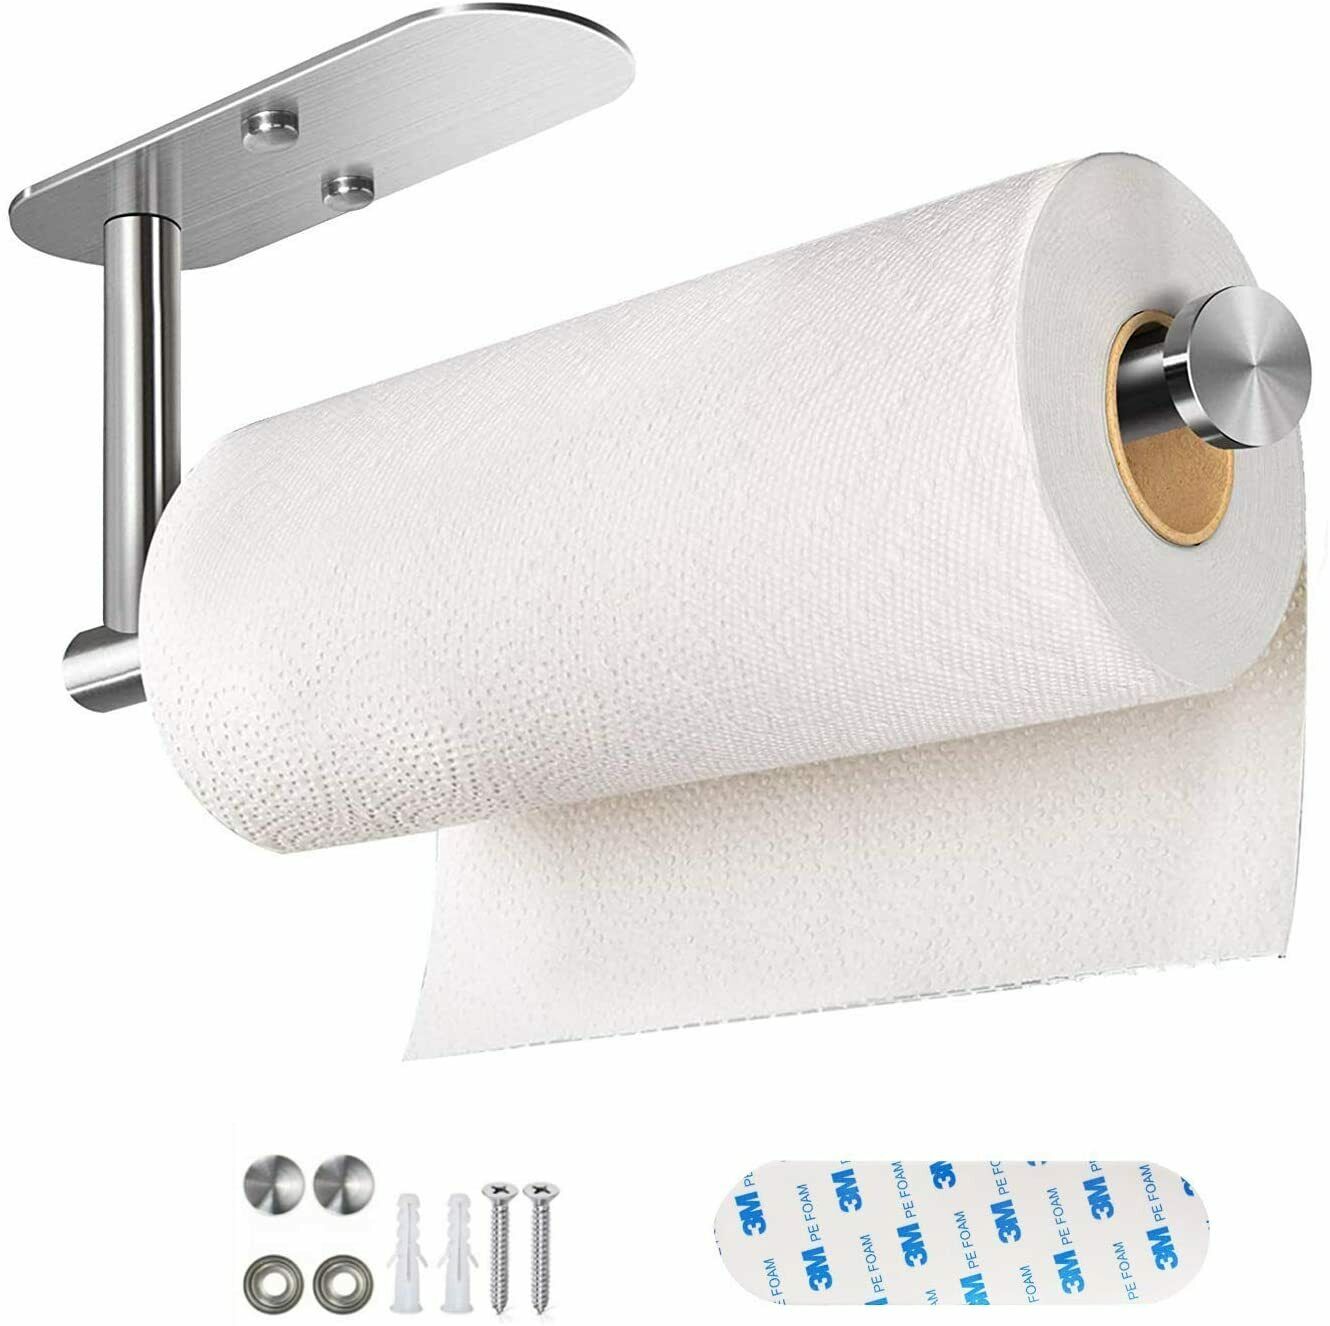 Self-adhesive Under Cabinet Paper Roll Rack Towel Holder Tissue